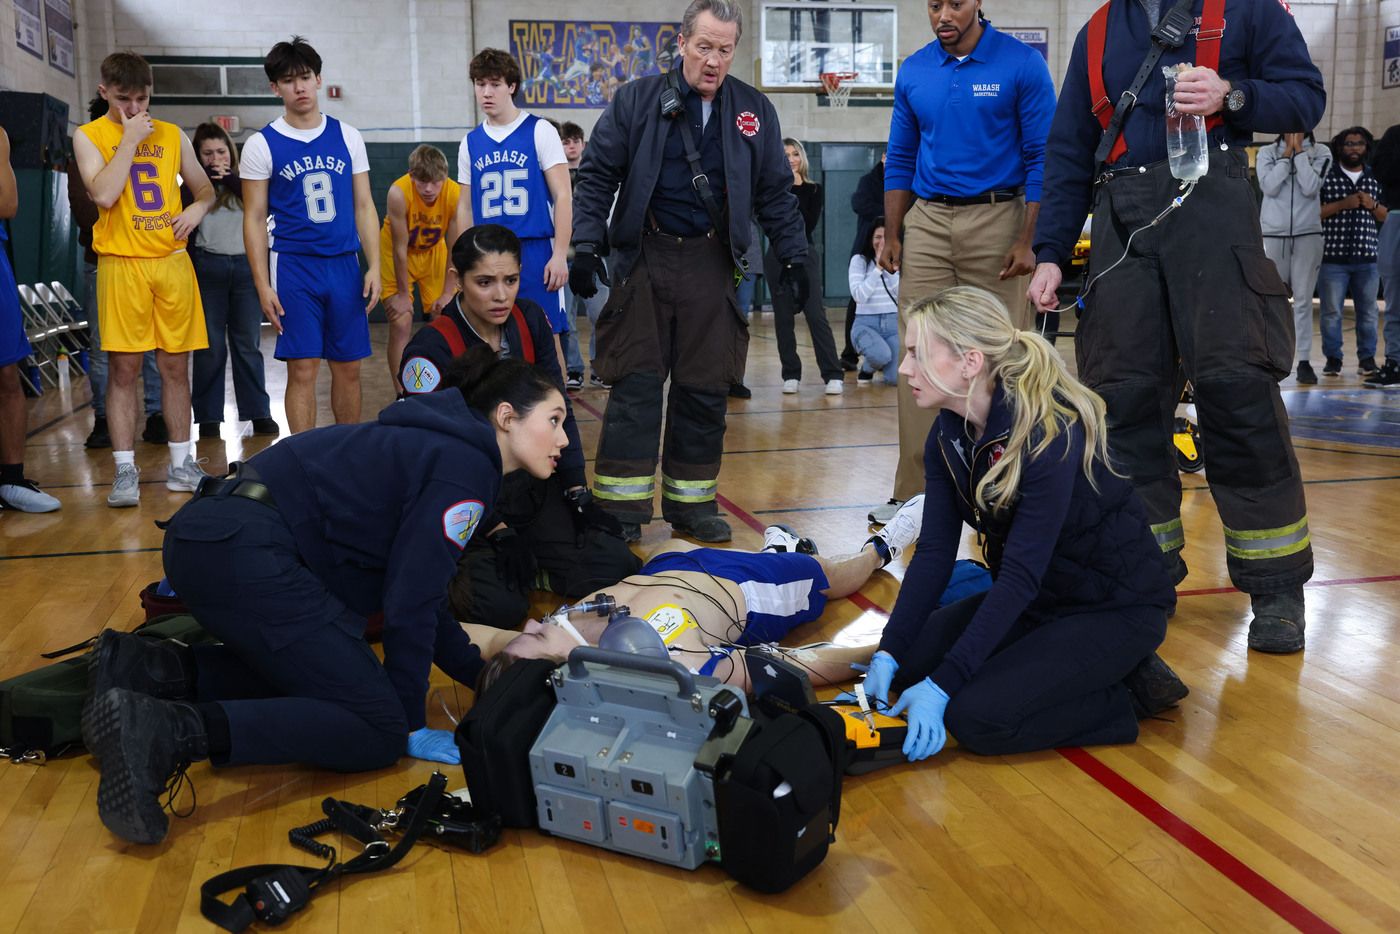 Paramedics treat an unconscious basketball player in high school gym on Chicago Fire